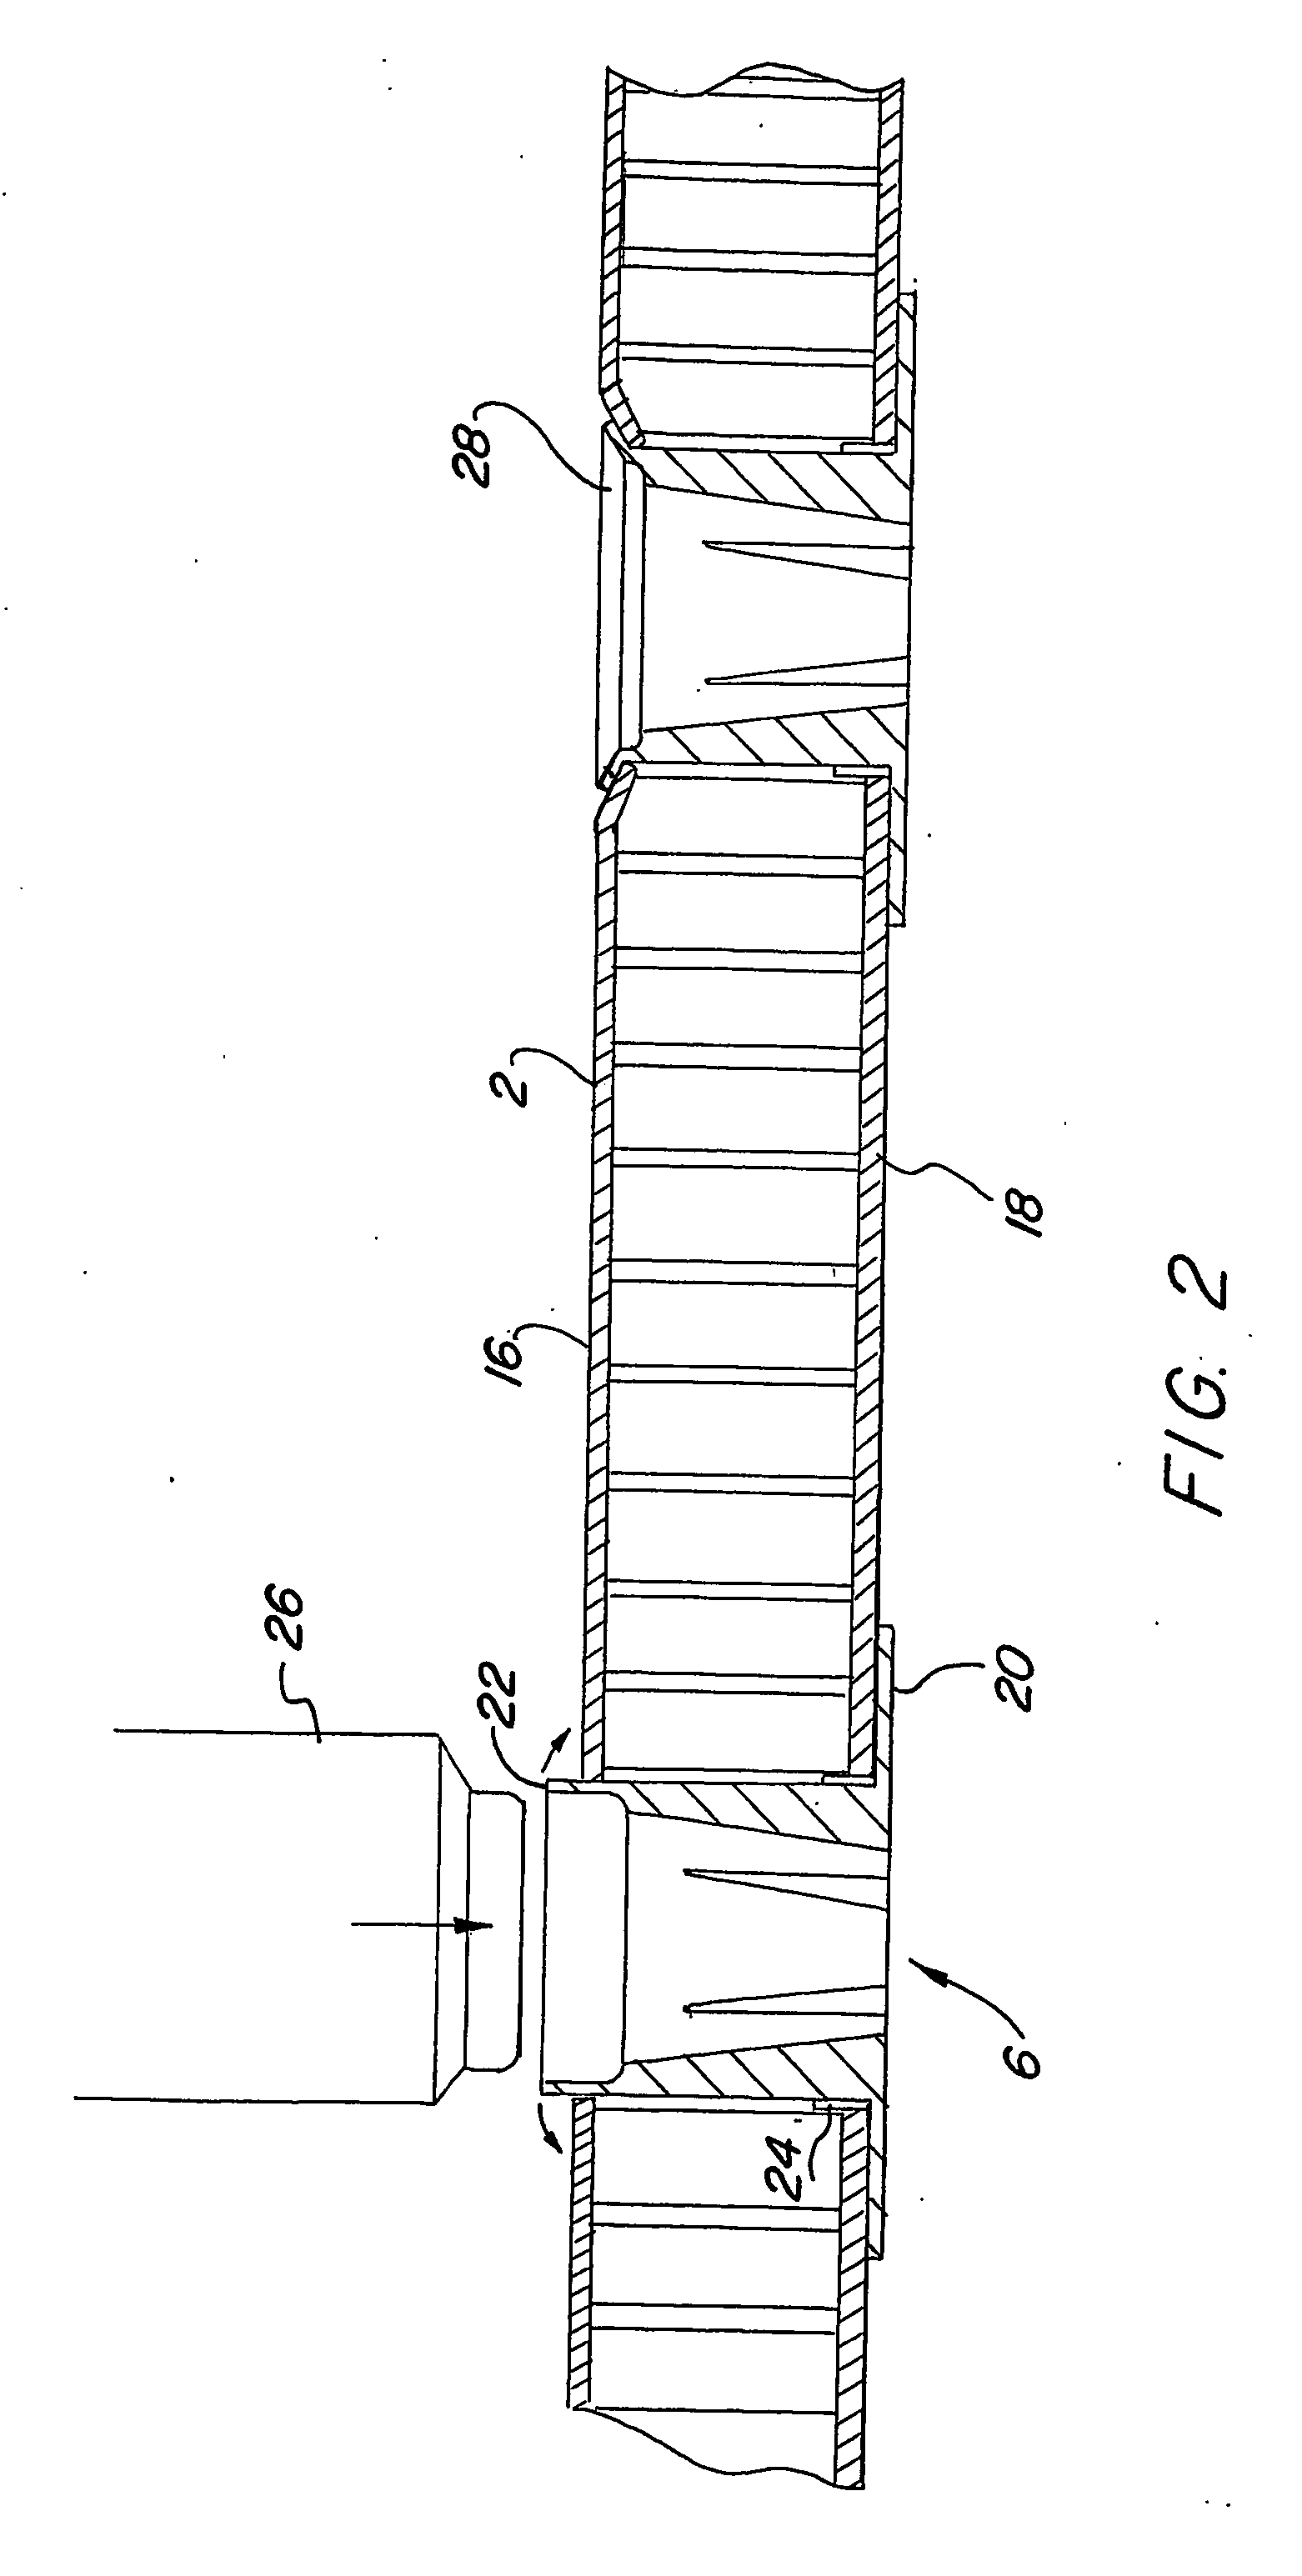 Expanded fastener for a honeycomb structure and method of assembly